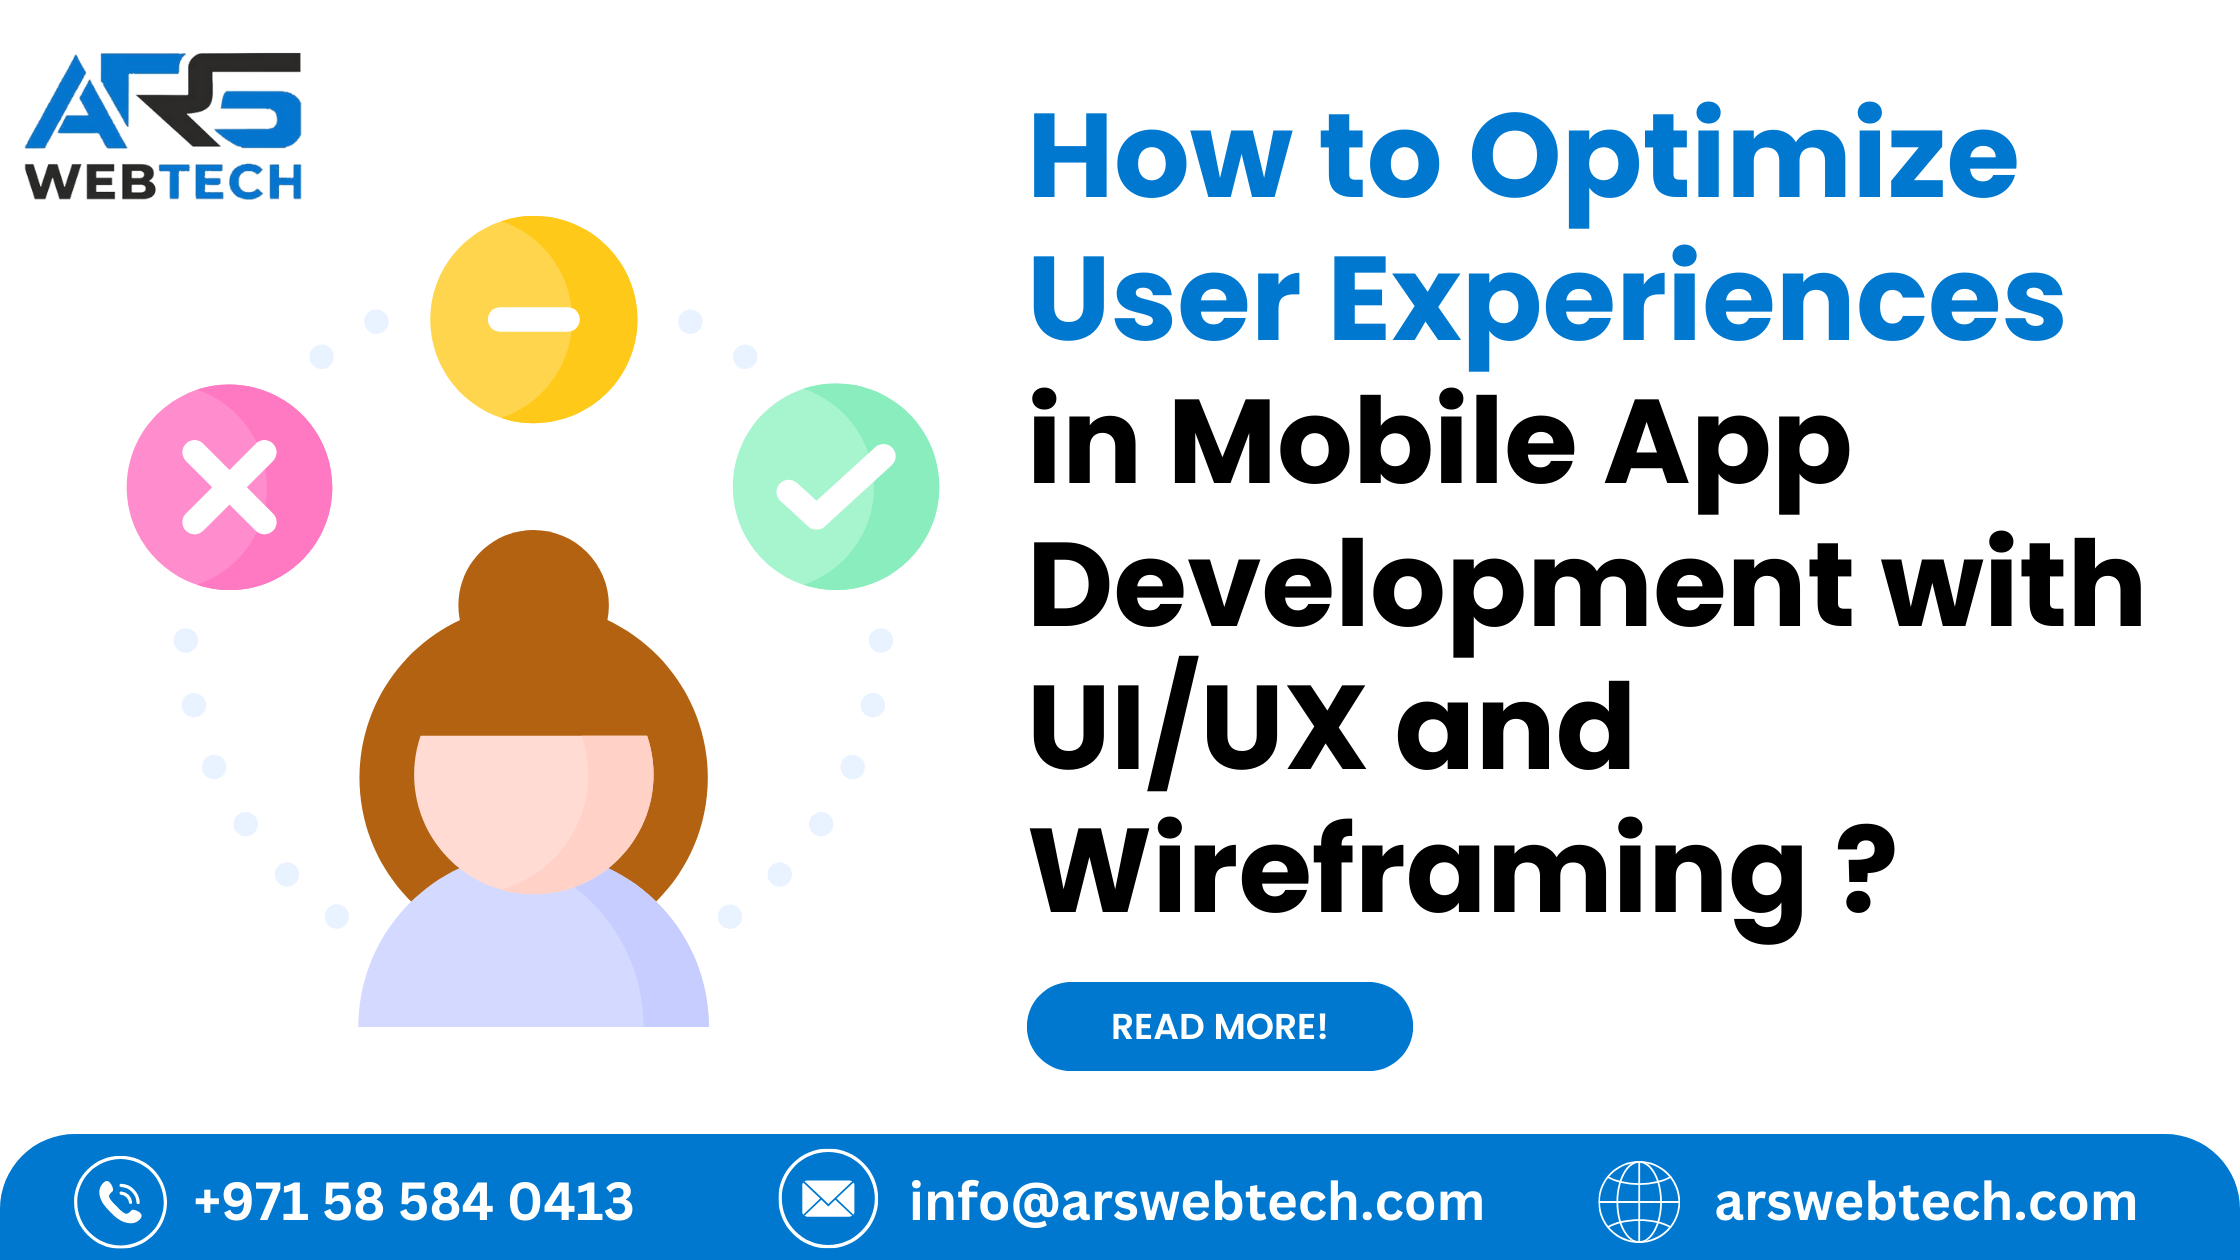 How to Optimize User Experiences in Mobile App Development with UI/UX and Wireframing